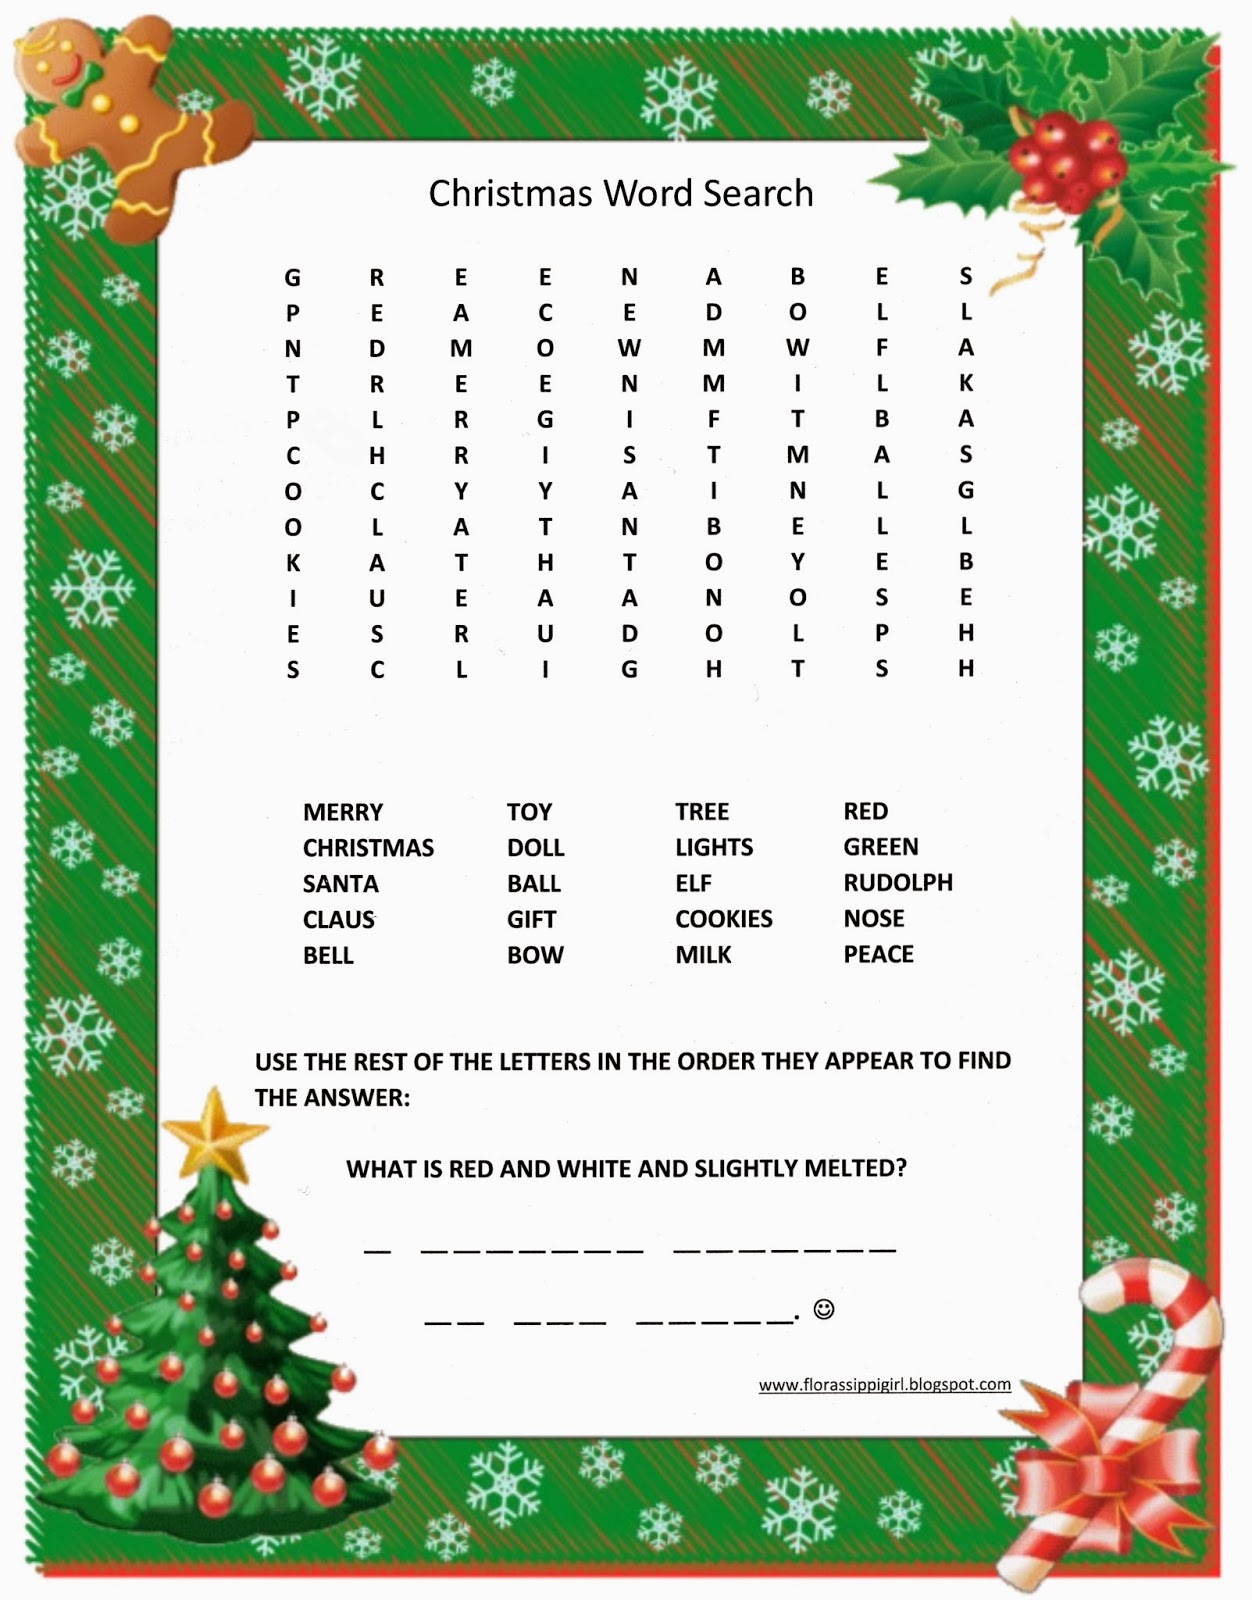 Florassippi Girl: Christmas Word Search - Free Printable